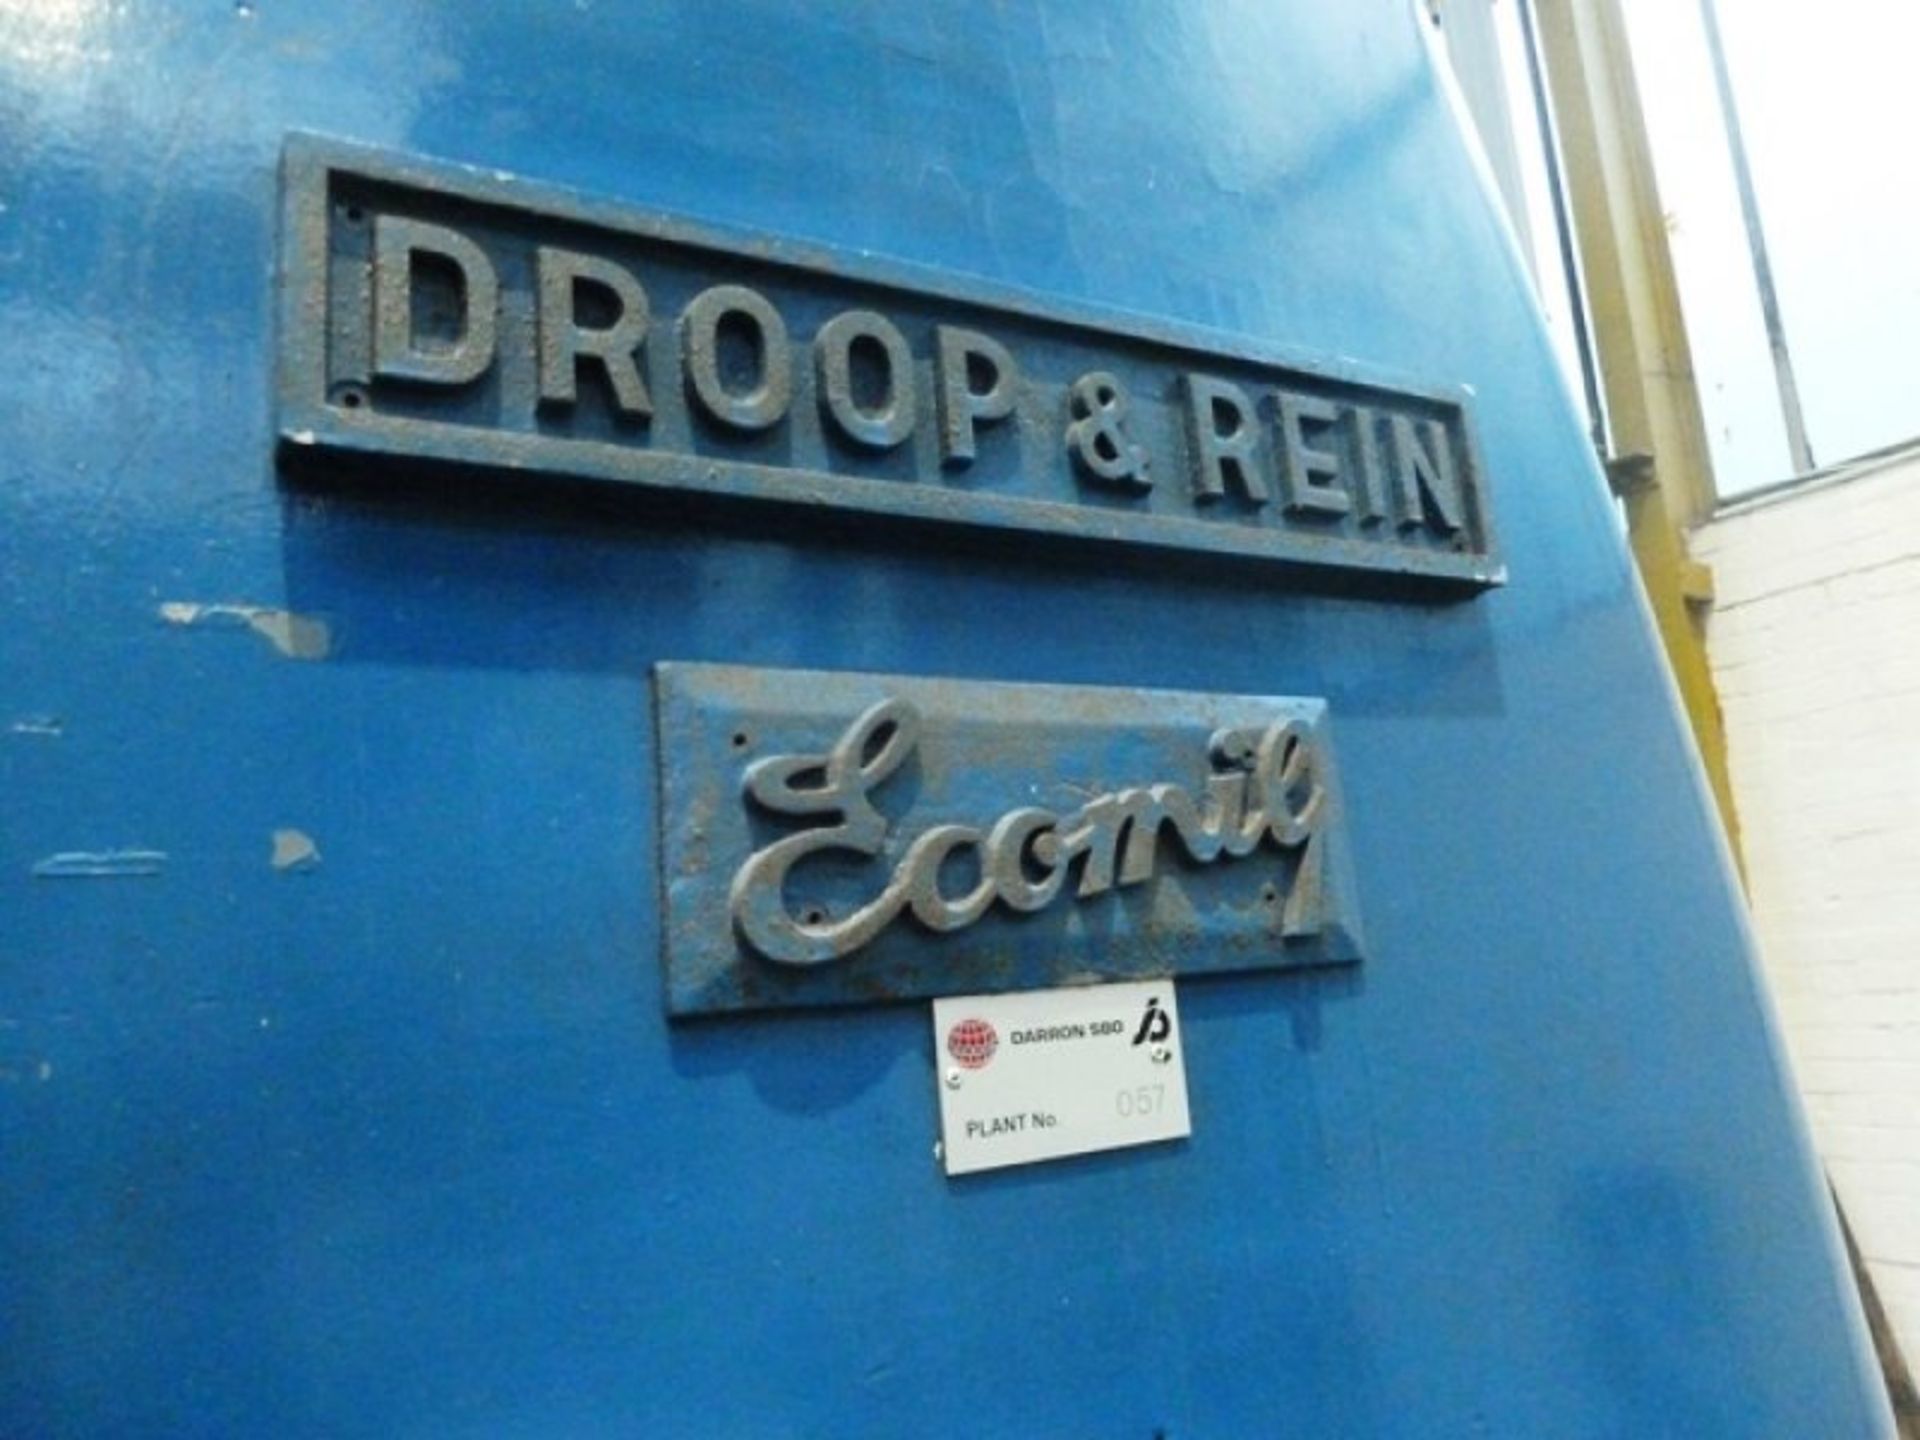 Droop & Rein CNC Milling Machine with 4thAxis - Image 9 of 12